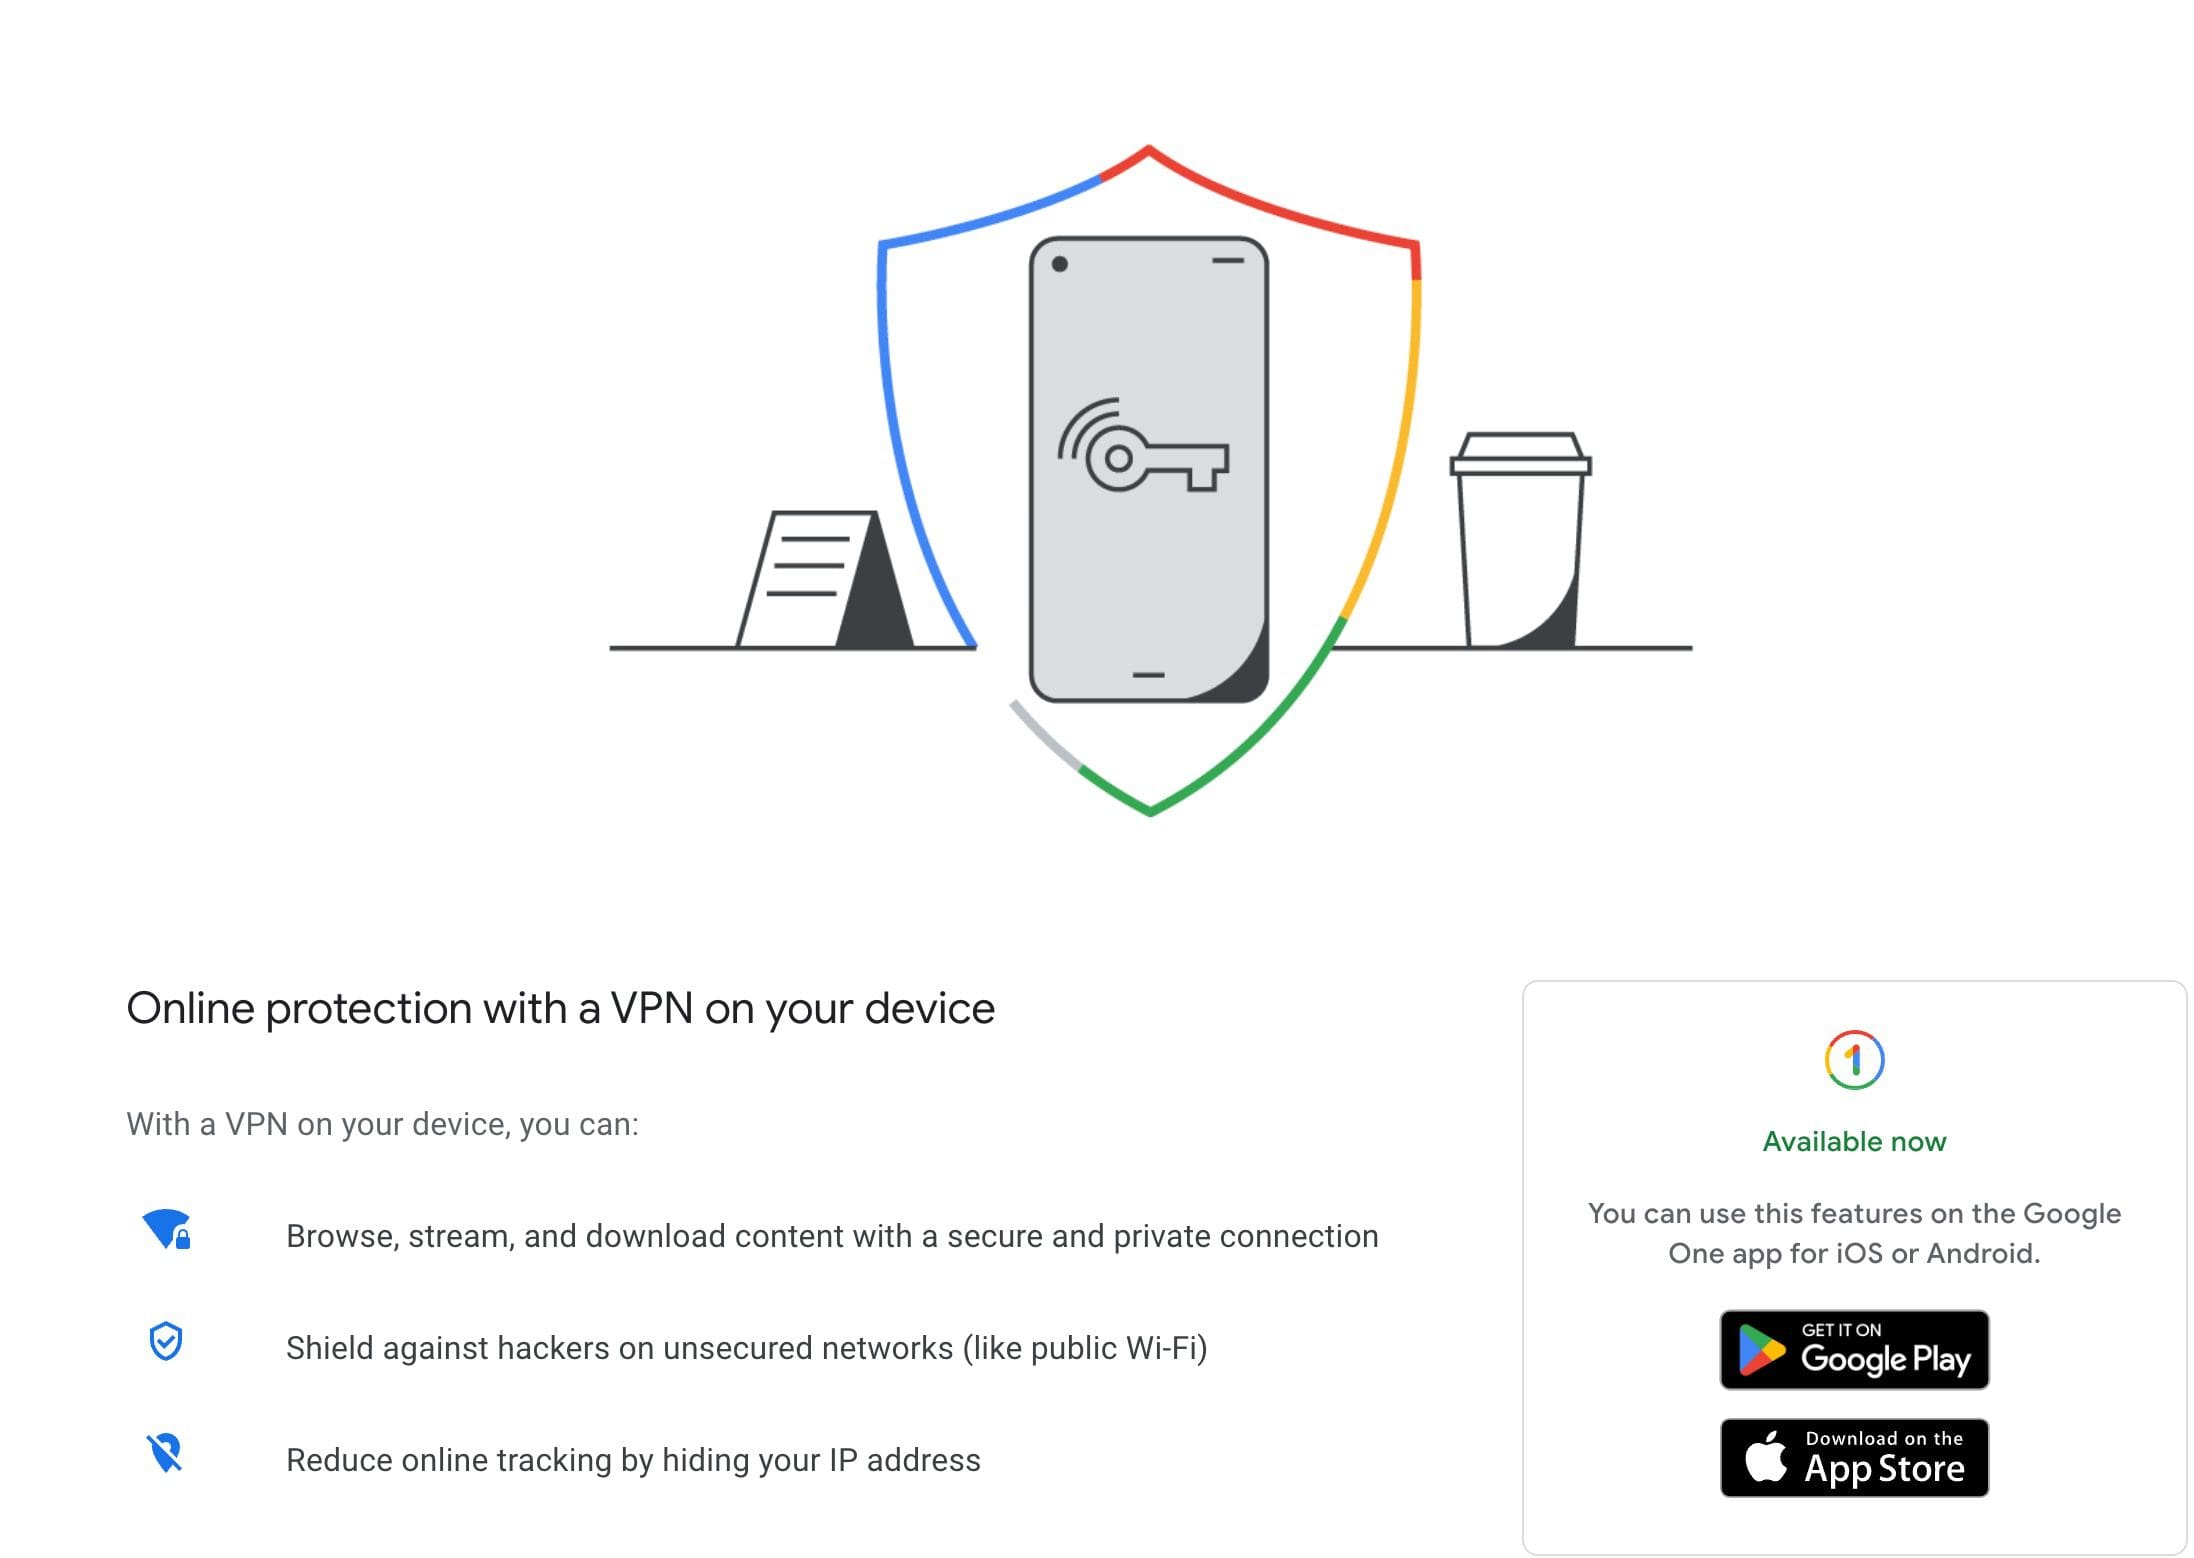 How to Use Google One VPN on macOS Overview